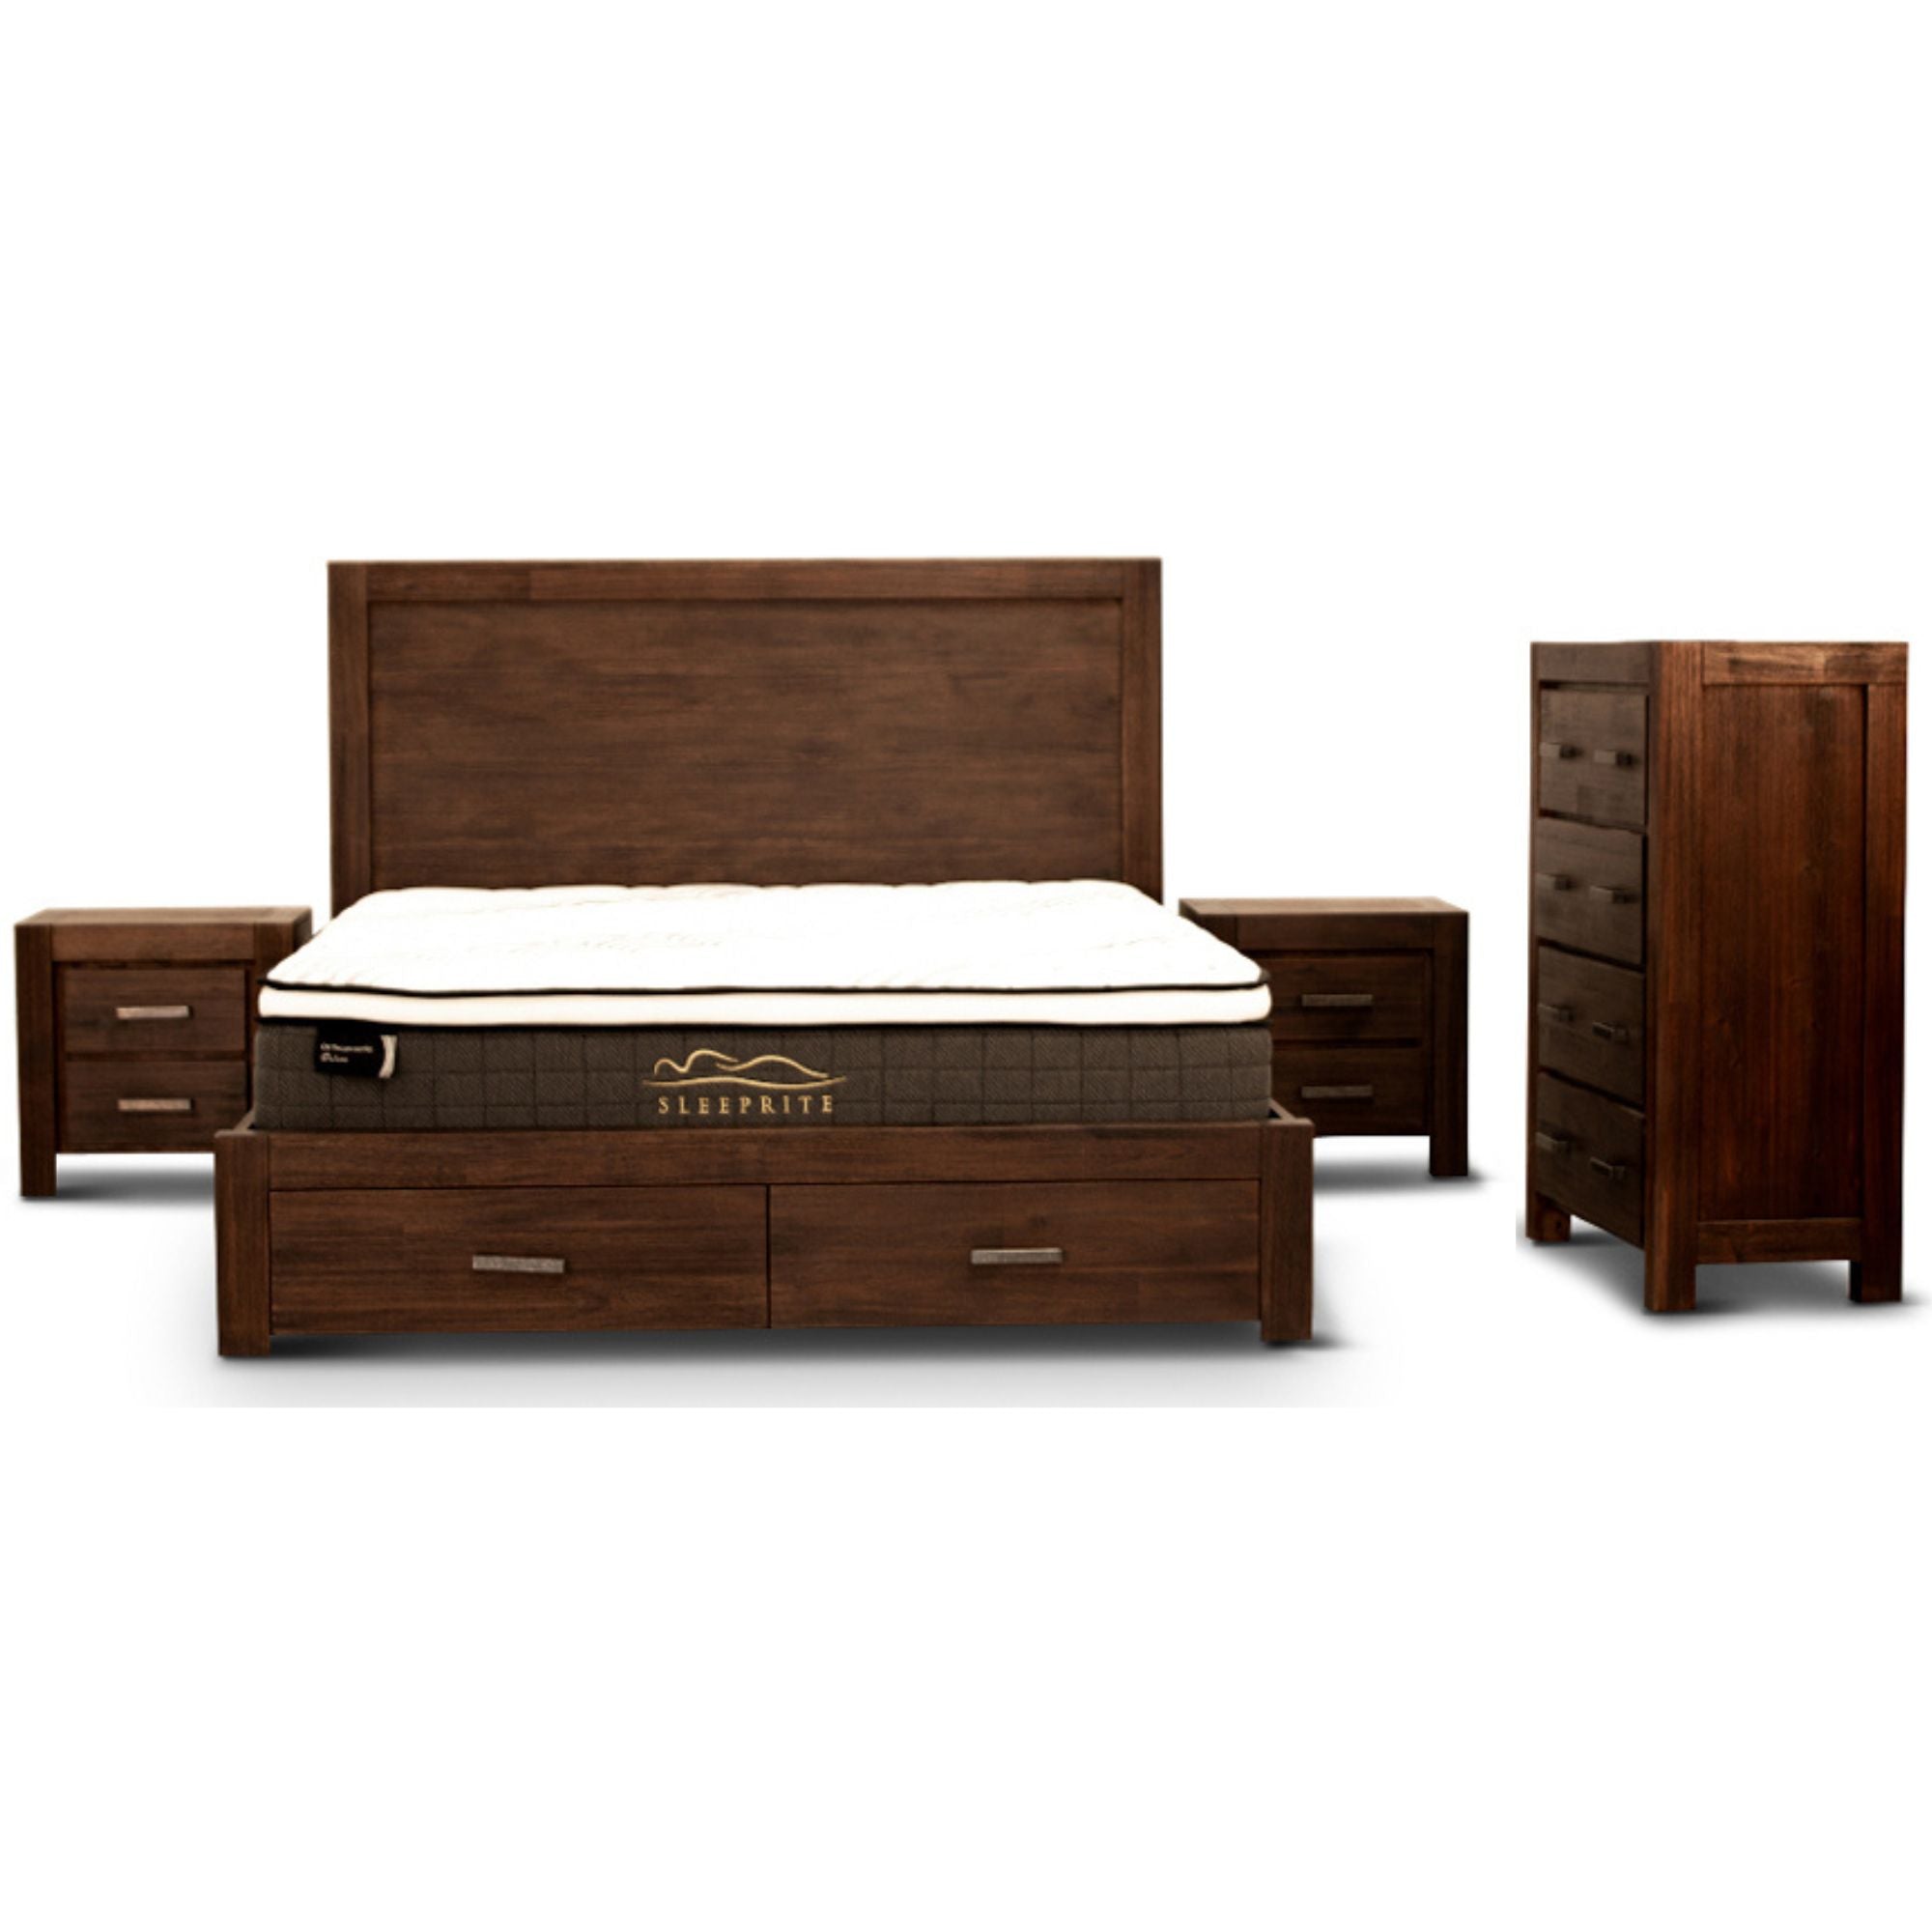 Queen Size Four Pce Bedroom Suite Incl. Bed, Bedside Tables and Tallboy - Walnut